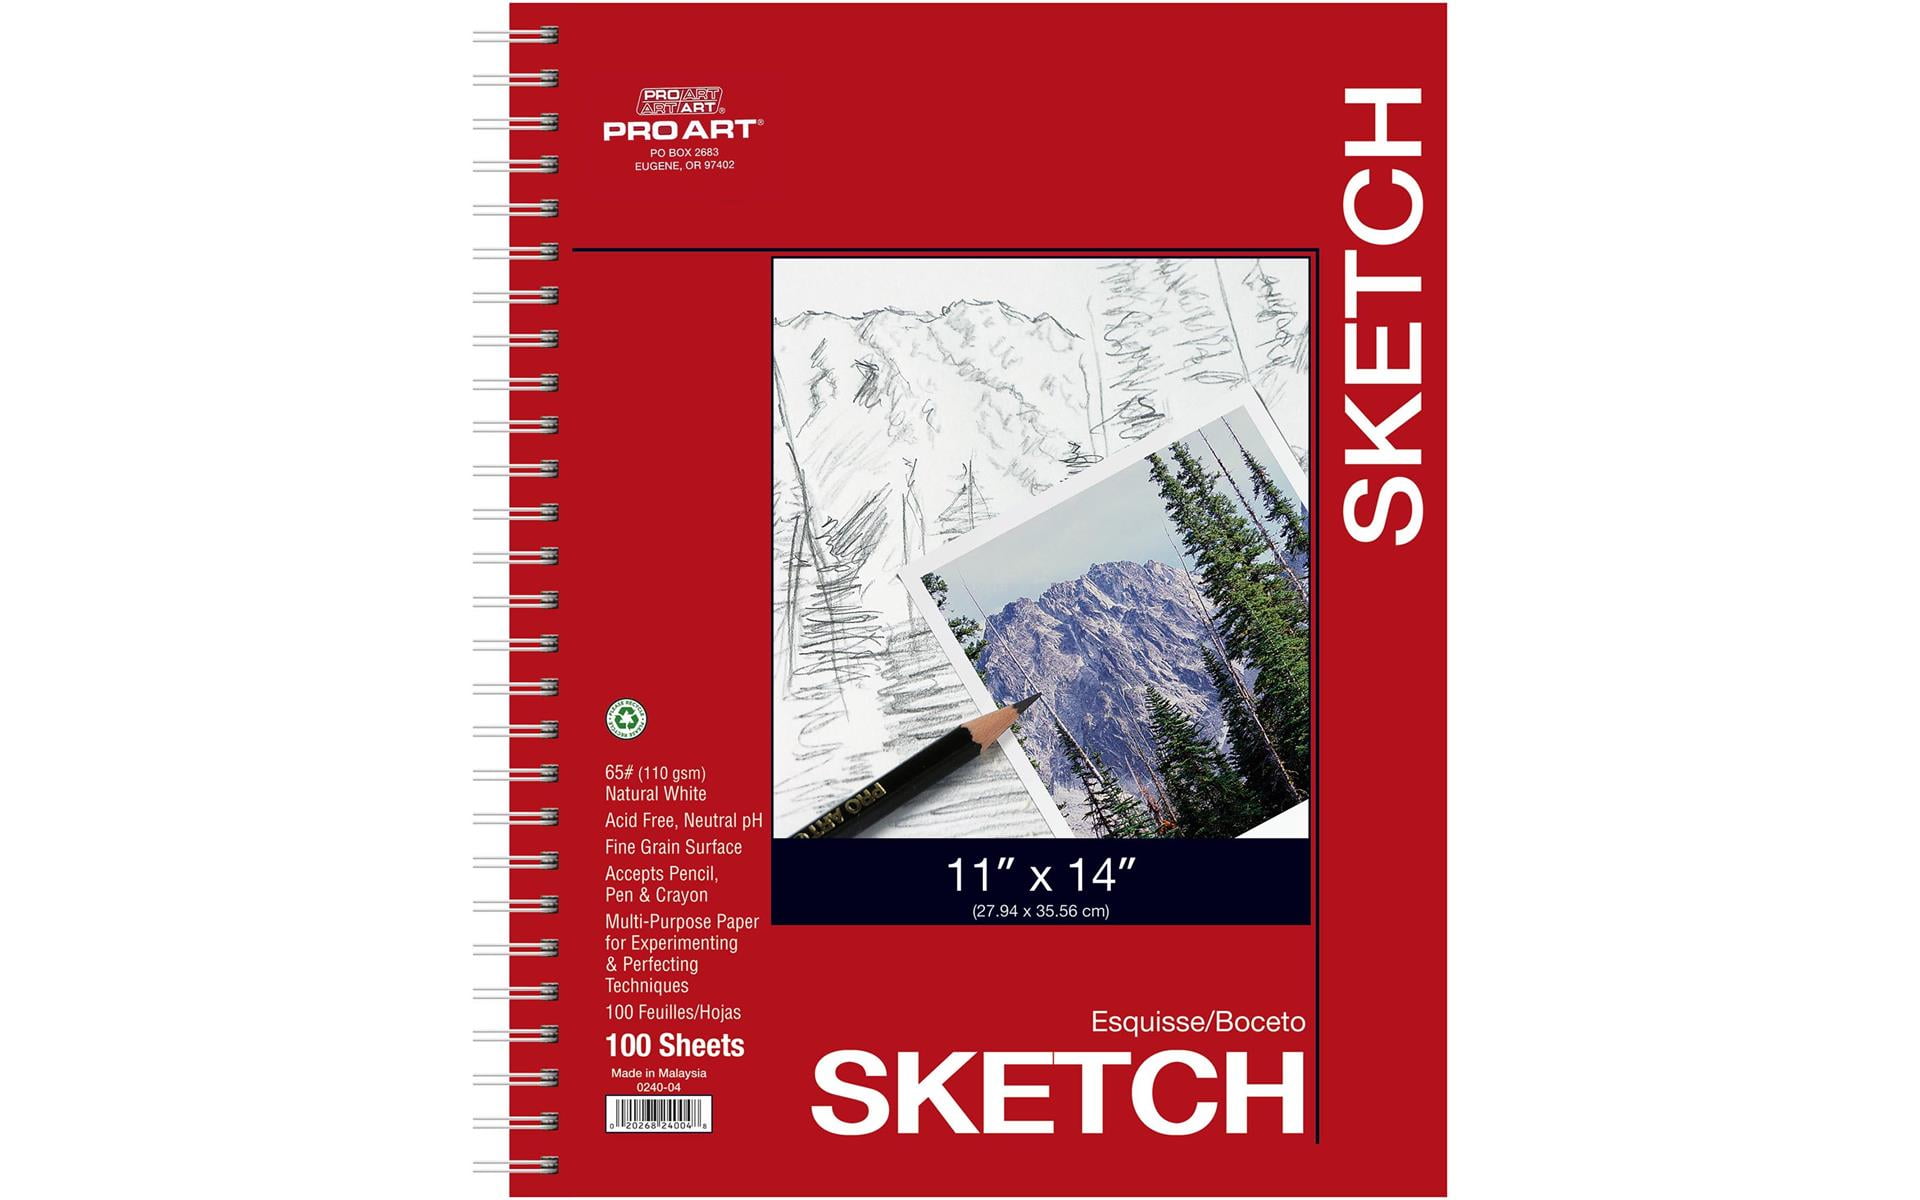 U.S. Art Supply 9 x 12 Mixed Media Paper Pad Sketchbook, 2 Pack, 60  Sheets, 98 lb (160 gsm) - Spiral-Bound, Perforated, Acid-Free - Artist  Sketching, Drawing, Painting Watercolor, Acrylic, Wet 